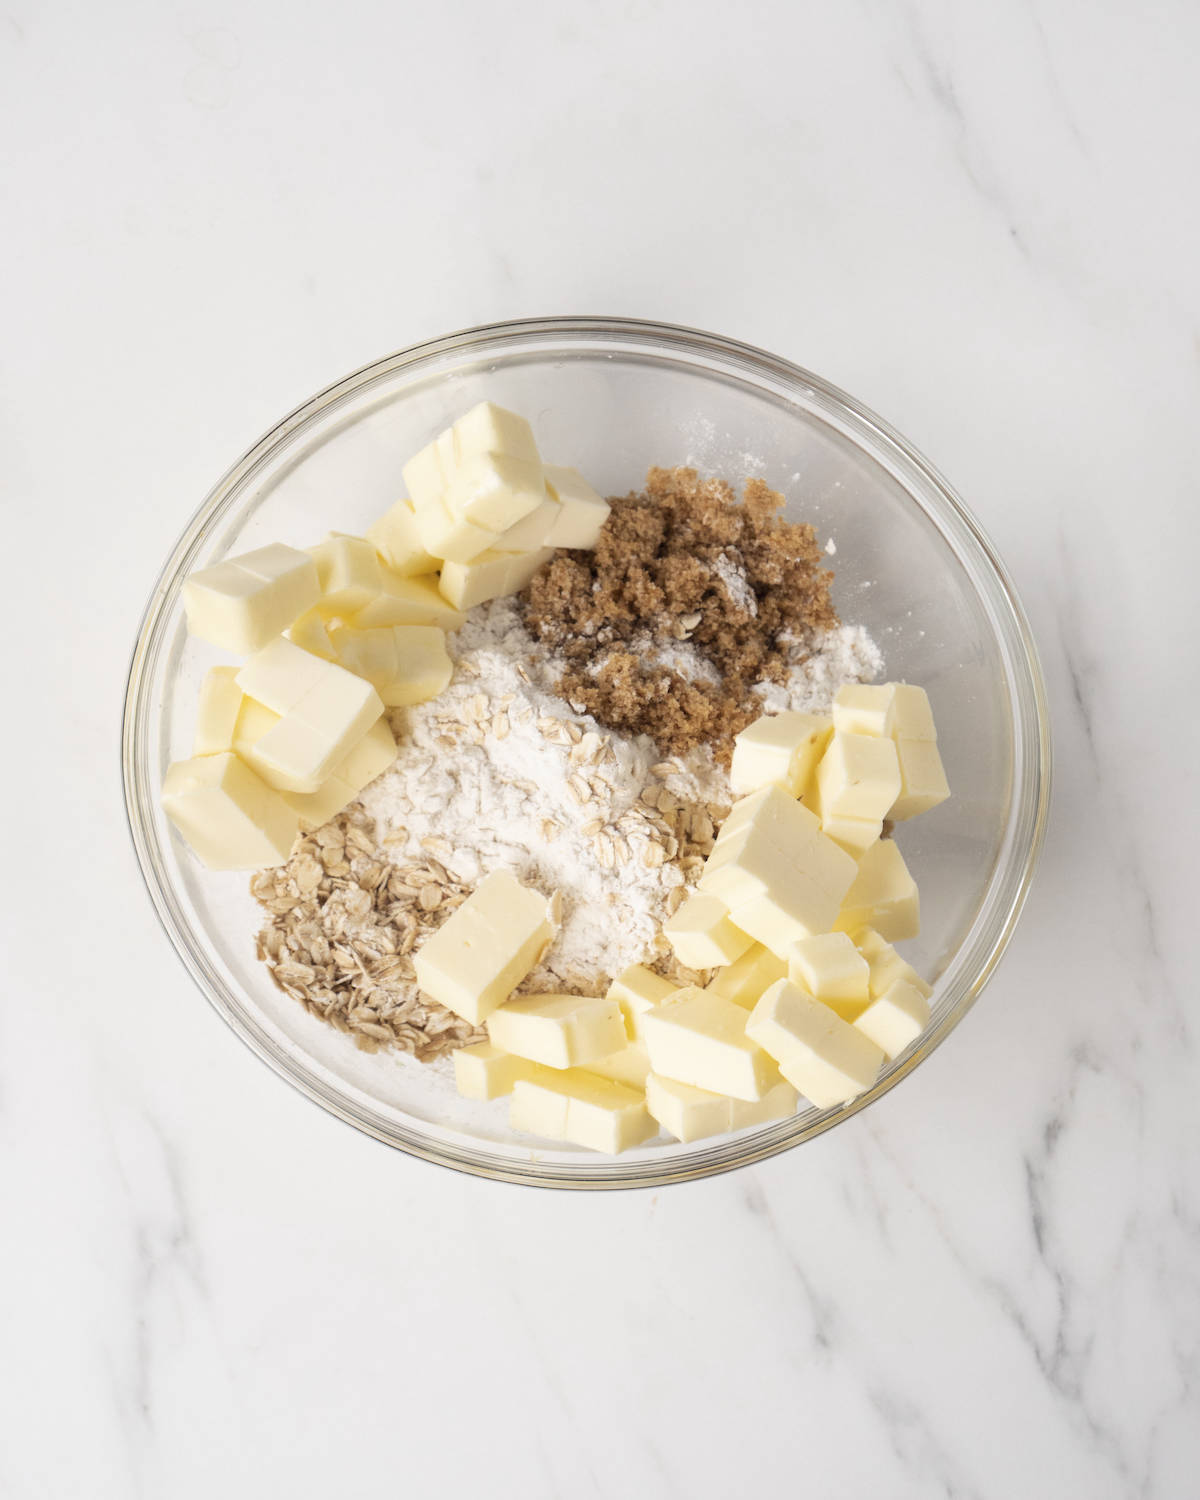 Clear mixing bowl with oats, flour, dark brown sugar, and cubed butter on a white countertop.